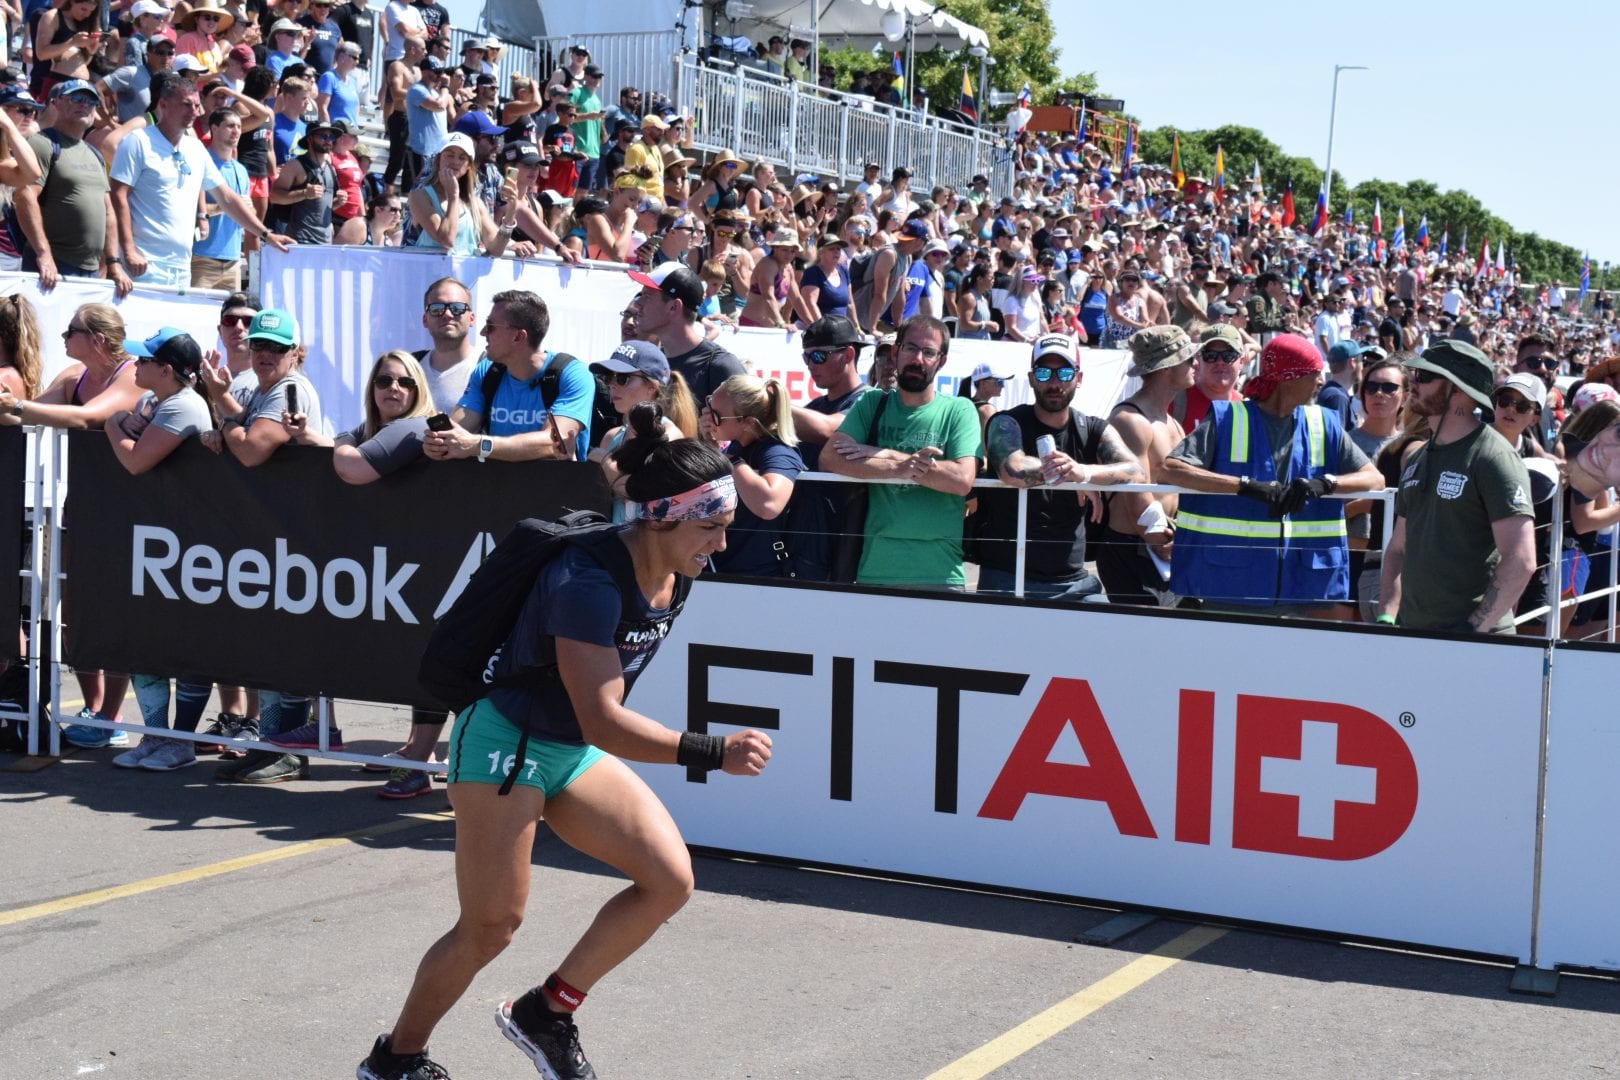 Anna Fragkou completes the Ruck Run event at the 2019 CrossFit Games.